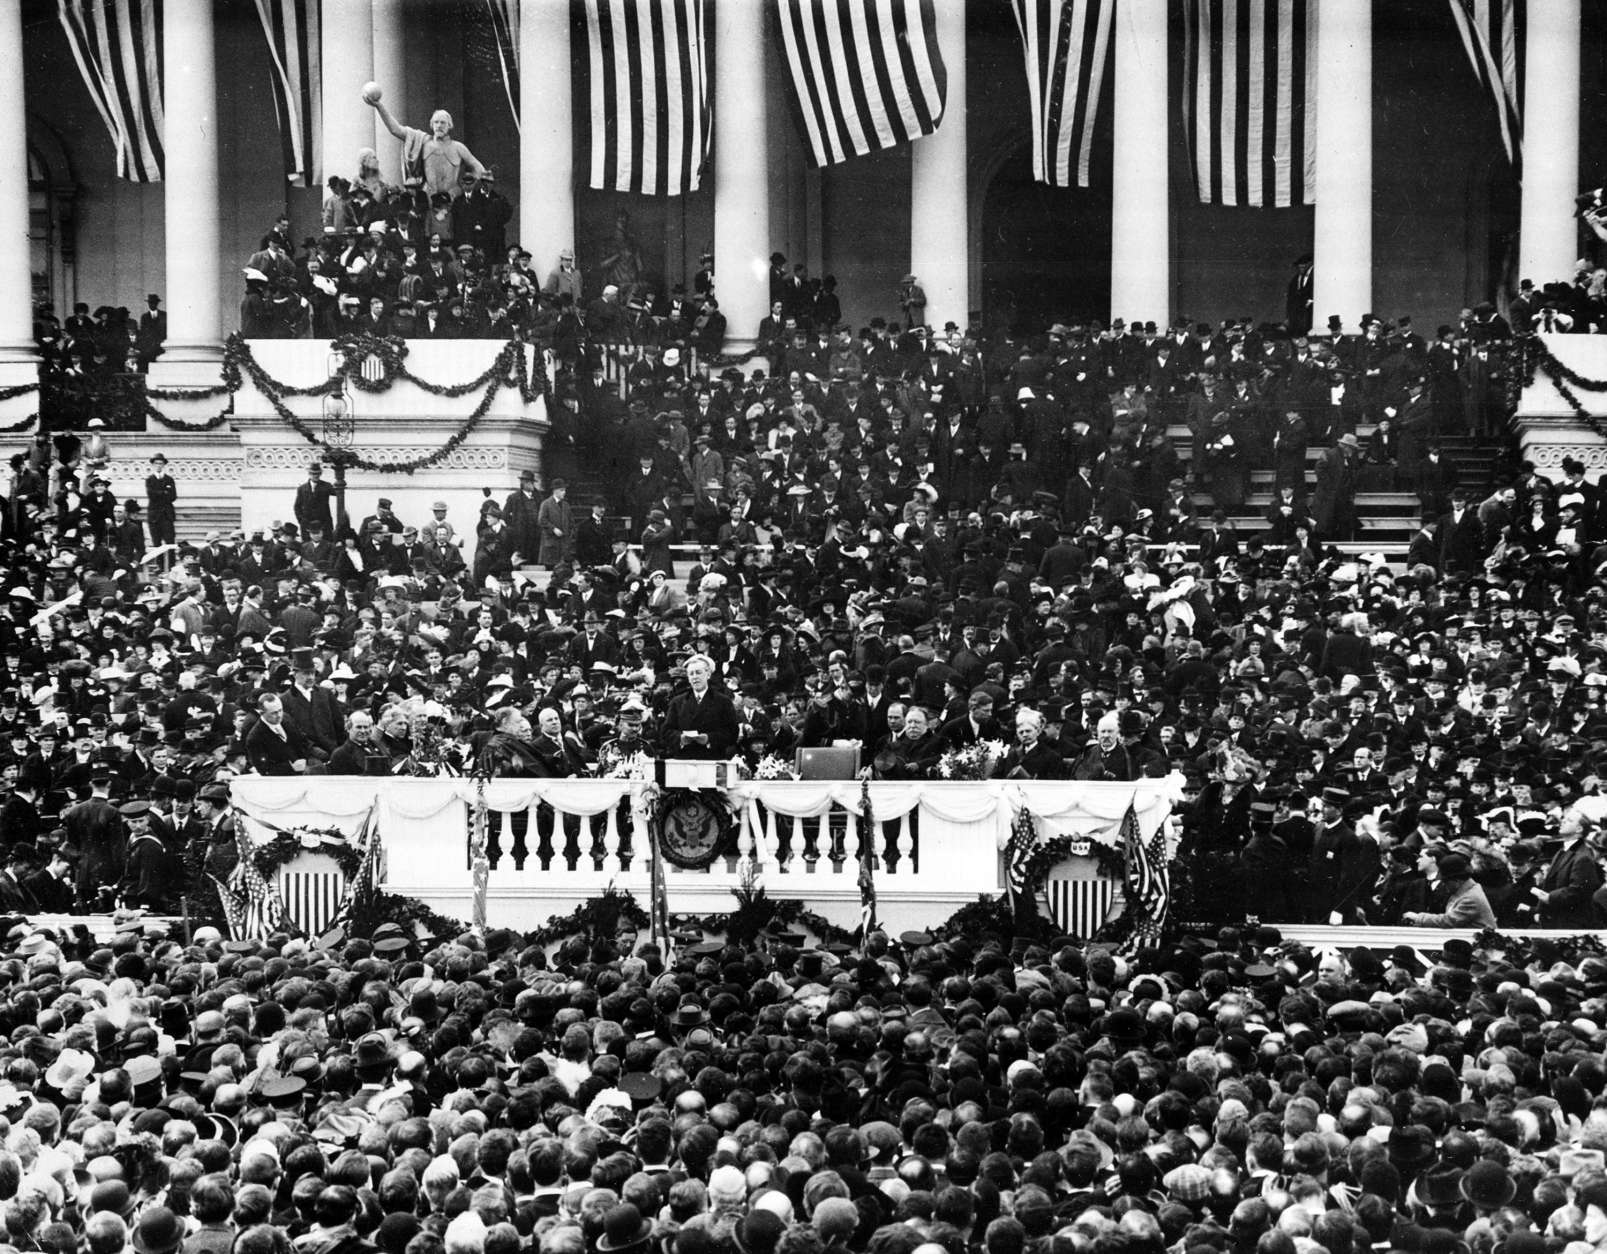 This general view shows the second inauguration of President Woodrow Wilson as he delivers his inaugural address on the East Portico of the Capitol building in Washington, D.C., on March 5, 1917.  (AP Photo)